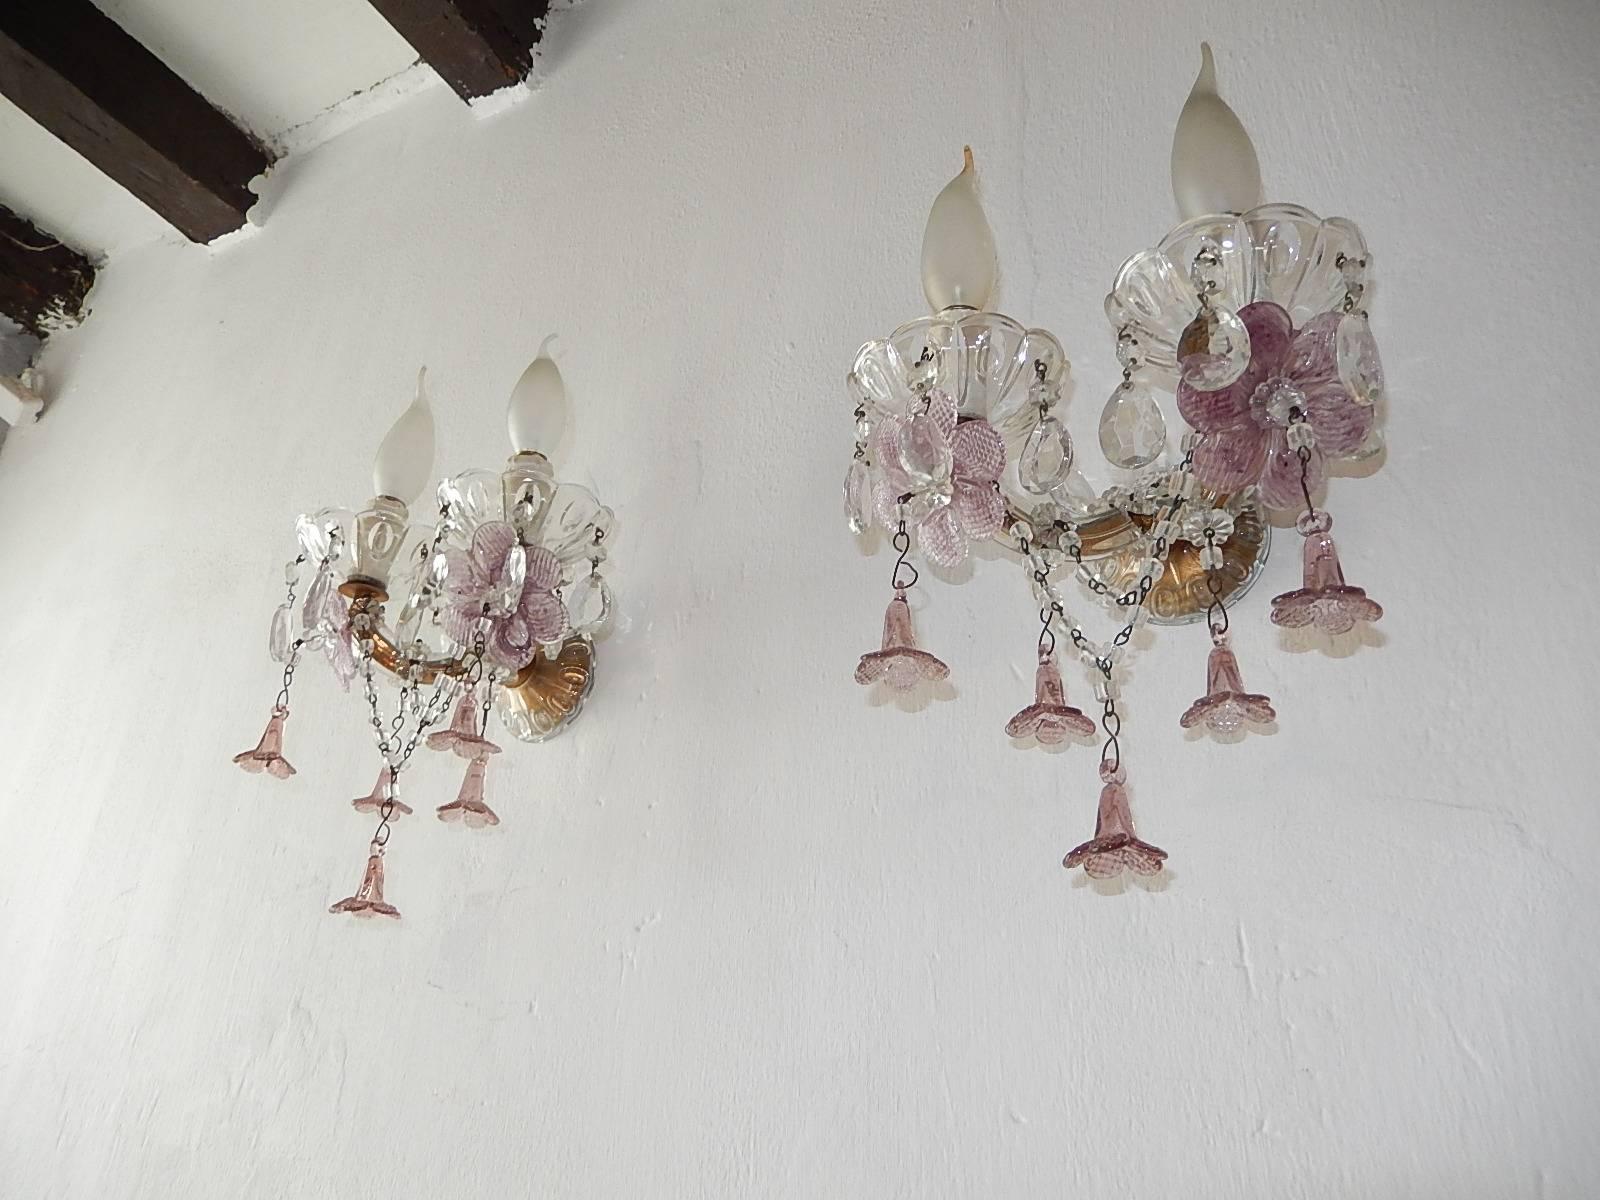 Housing two-light each. Re-wired and ready to hang. Gilt metal arms with Murano glass covering. Adorning rare Murano flowers and swags of crystal. Free priority shipping from Italy.